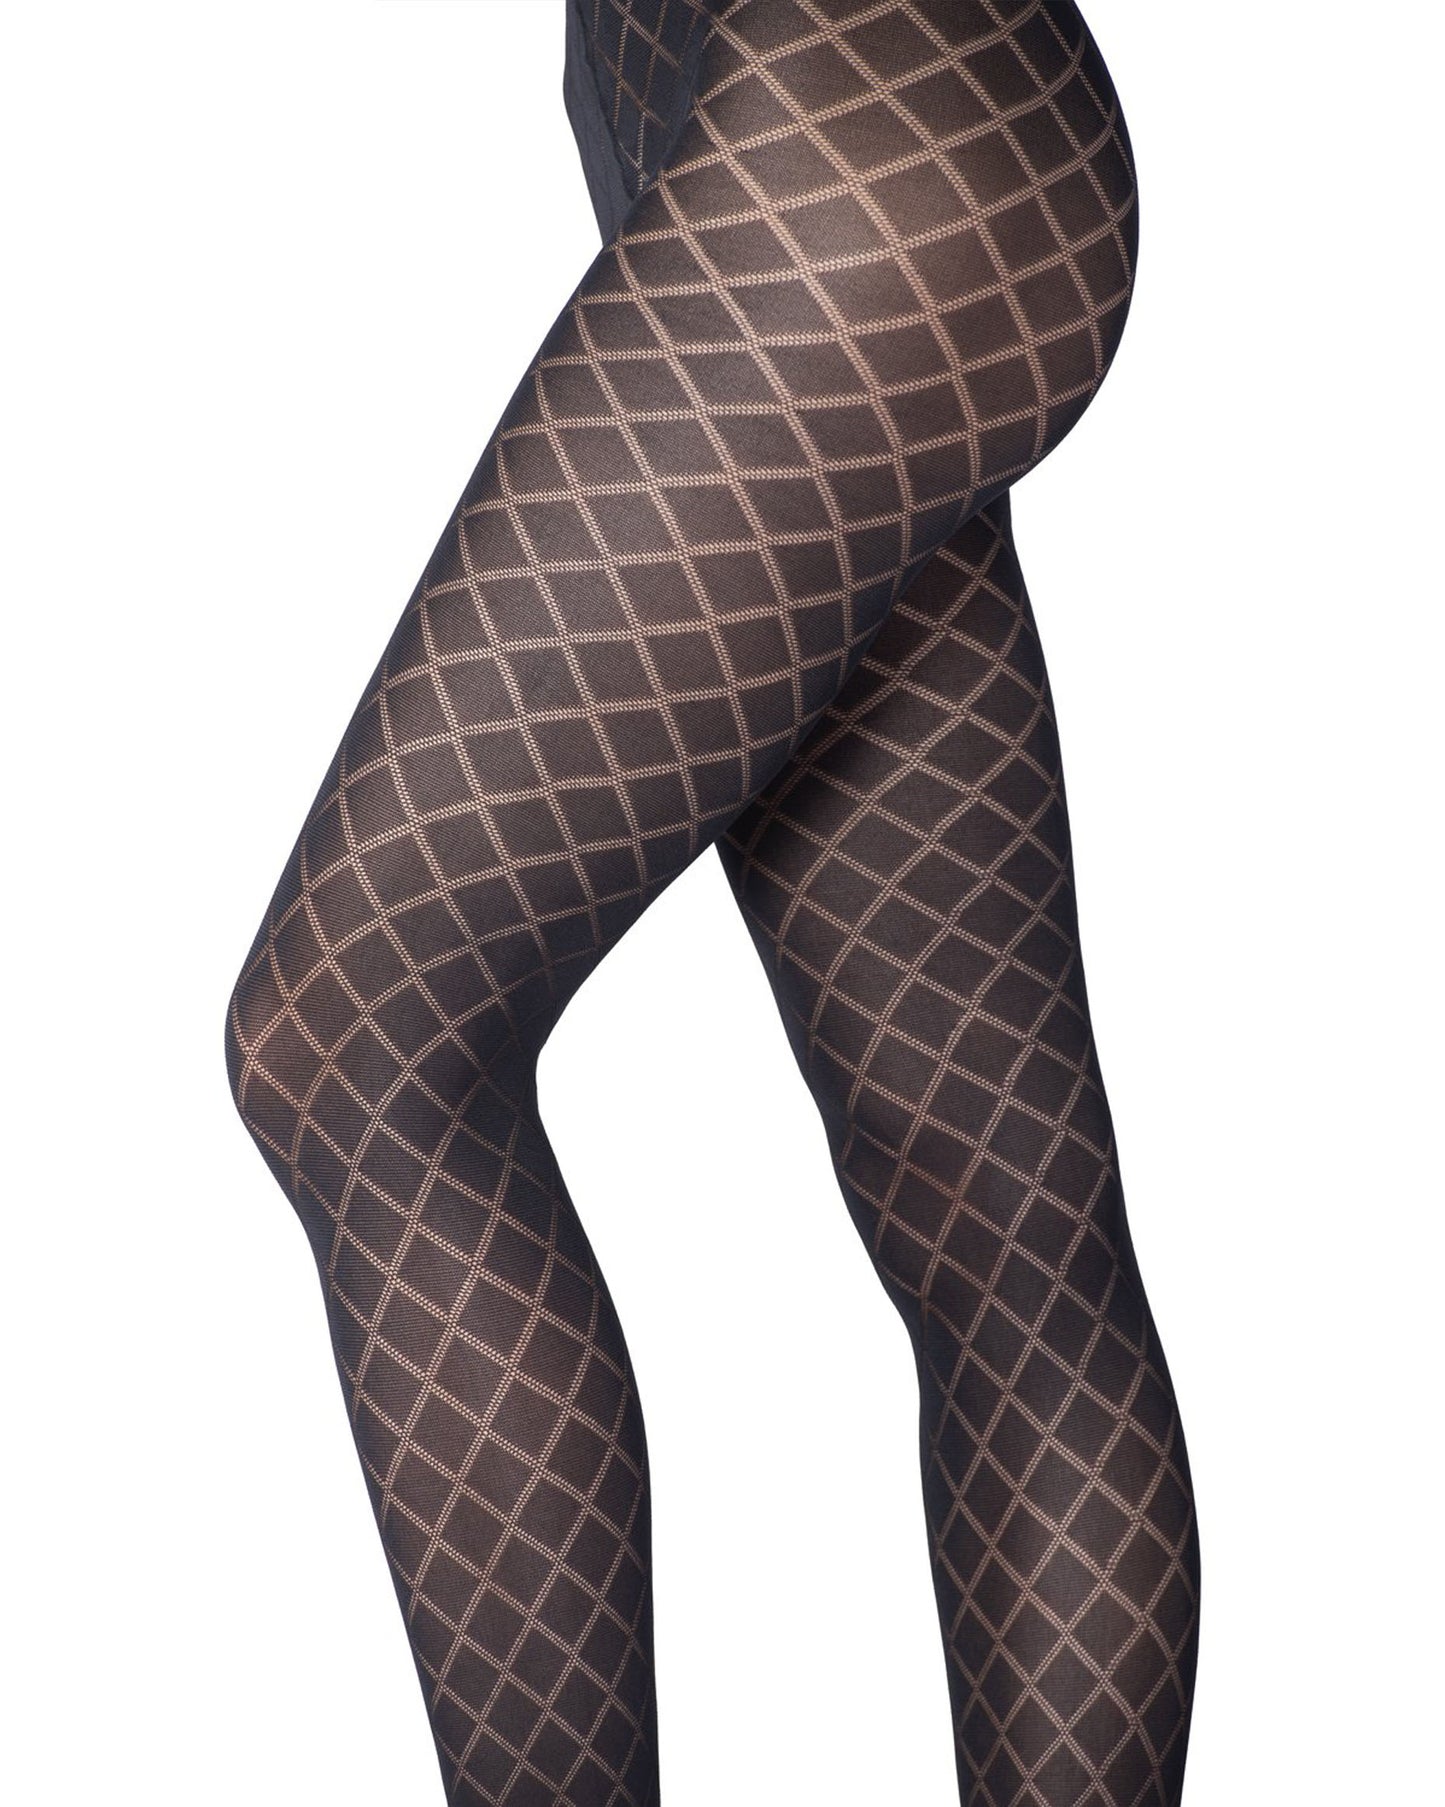 Emilio Cavallini Jacquard Diamonds Tights - Soft matte black opaque patterned tights with a sheer linear diamond pattern, flat seams and gusset. 